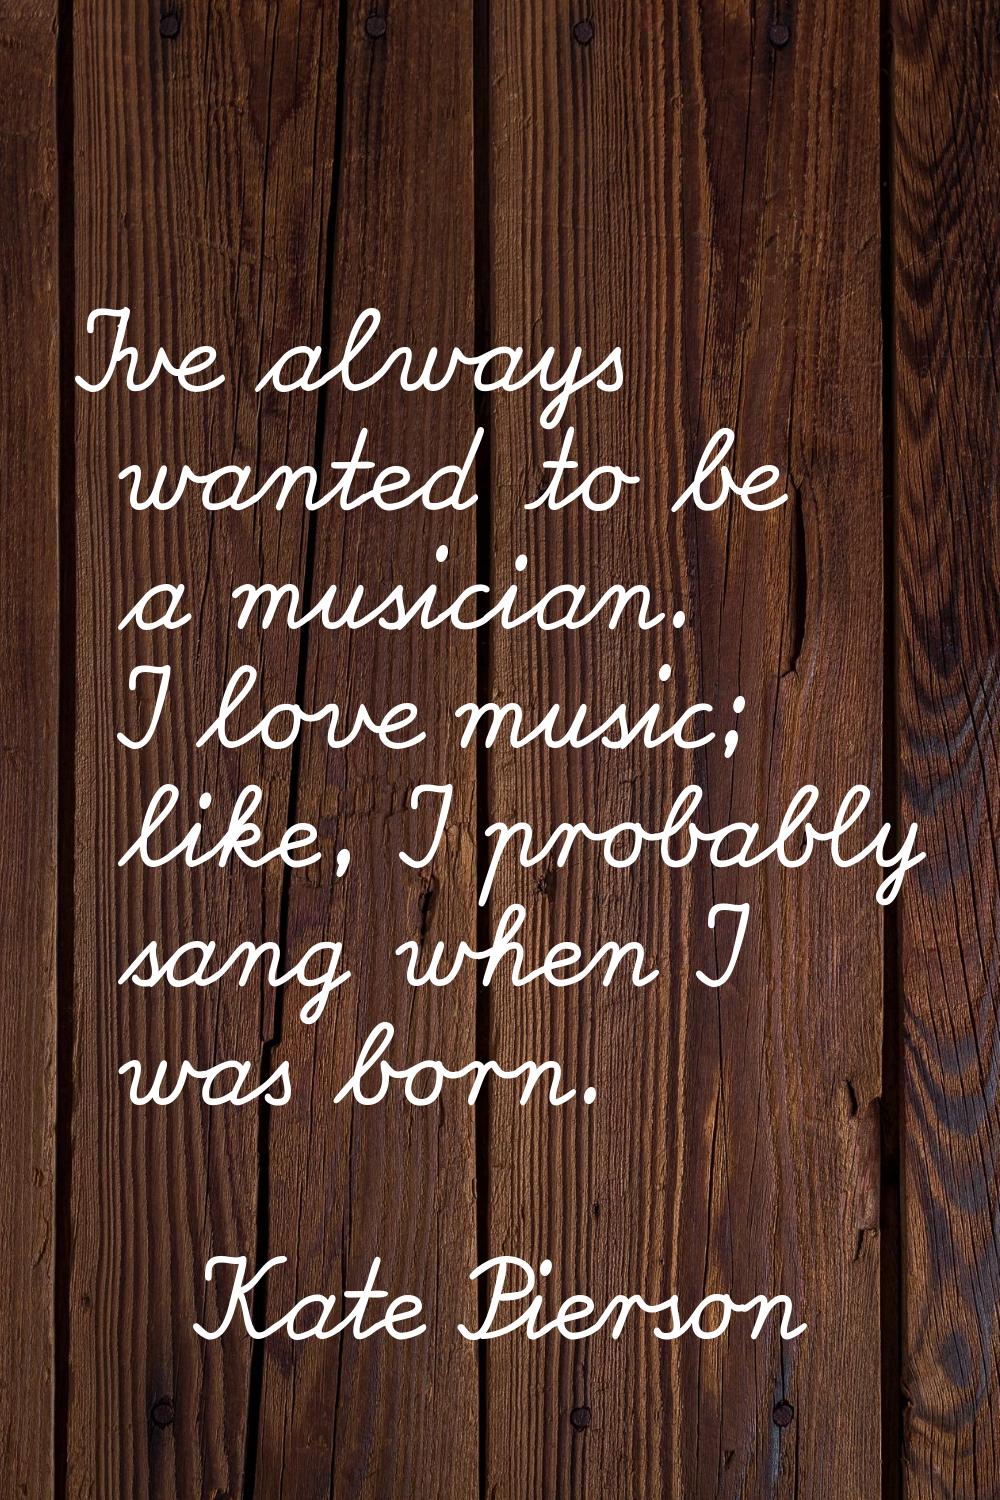 I've always wanted to be a musician. I love music; like, I probably sang when I was born.